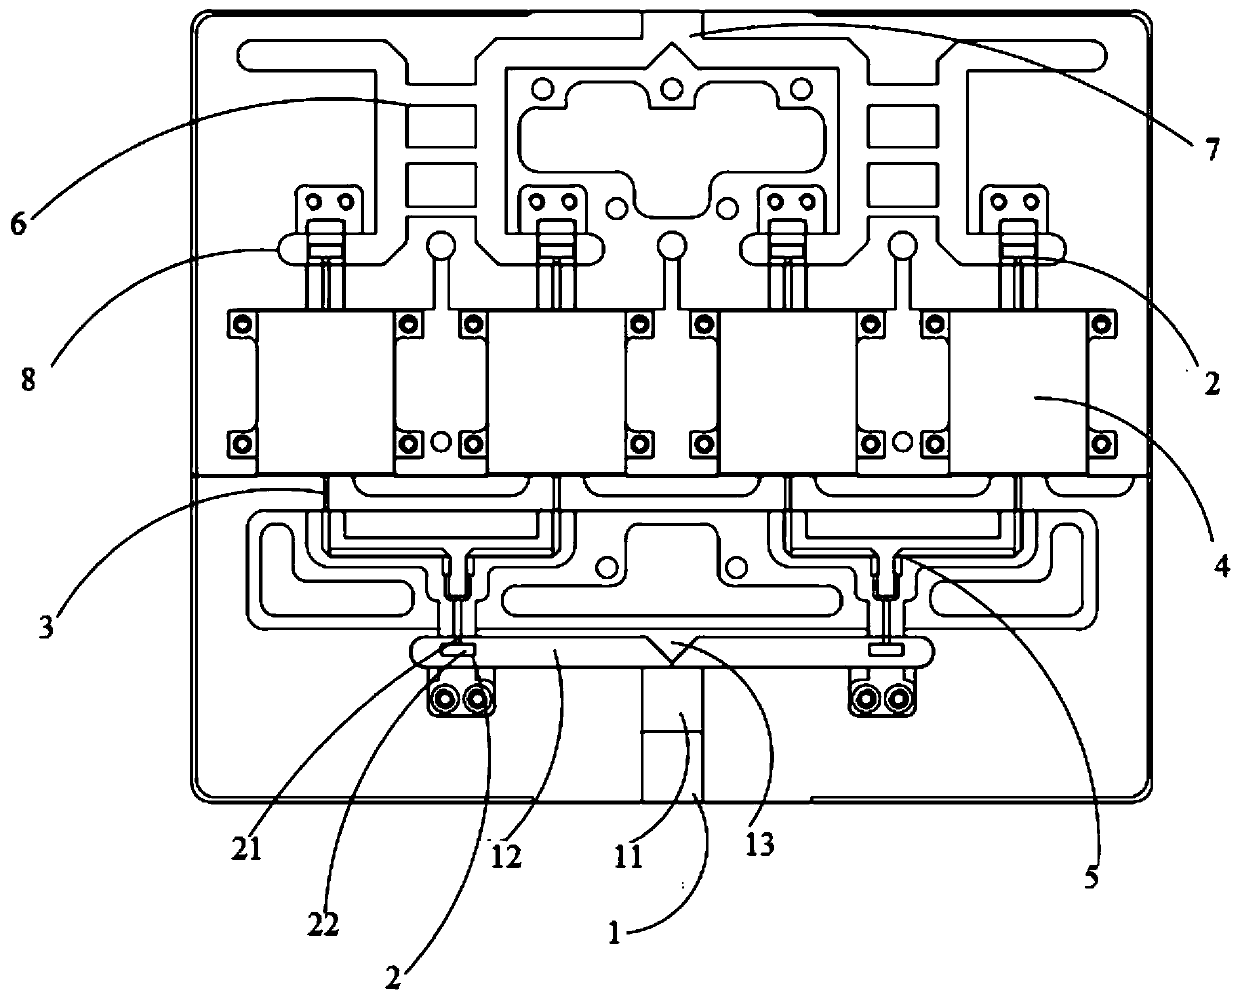 High-isolation power synthesis device